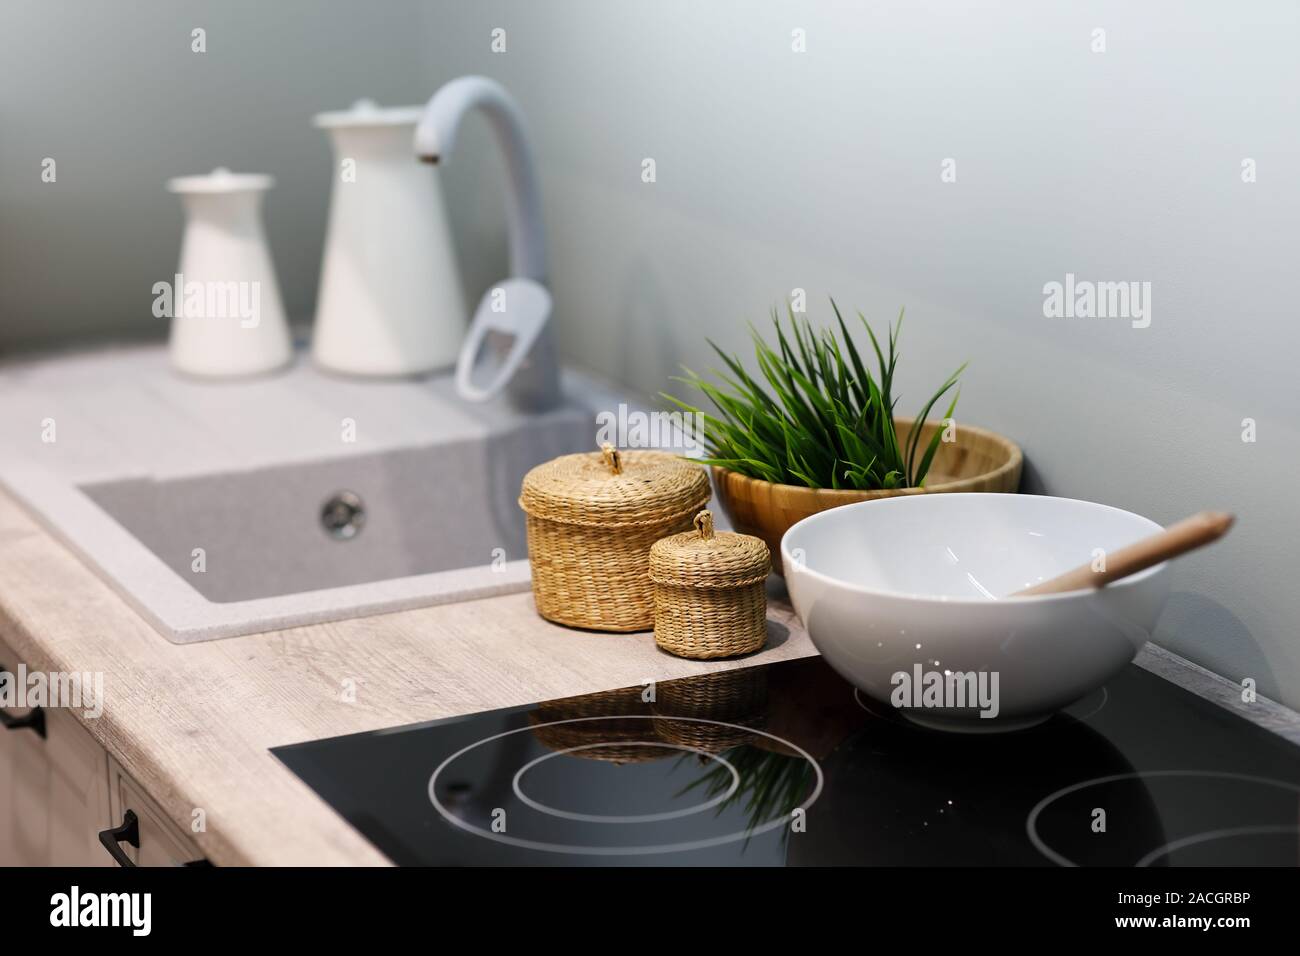 Kitchenware Pan At Small Electric Stove With Timer On Control Panel Modern  Kitchen With Wooden Surface Table And Marble Wall Tile At Blurred  Background Stock Photo - Download Image Now - iStock